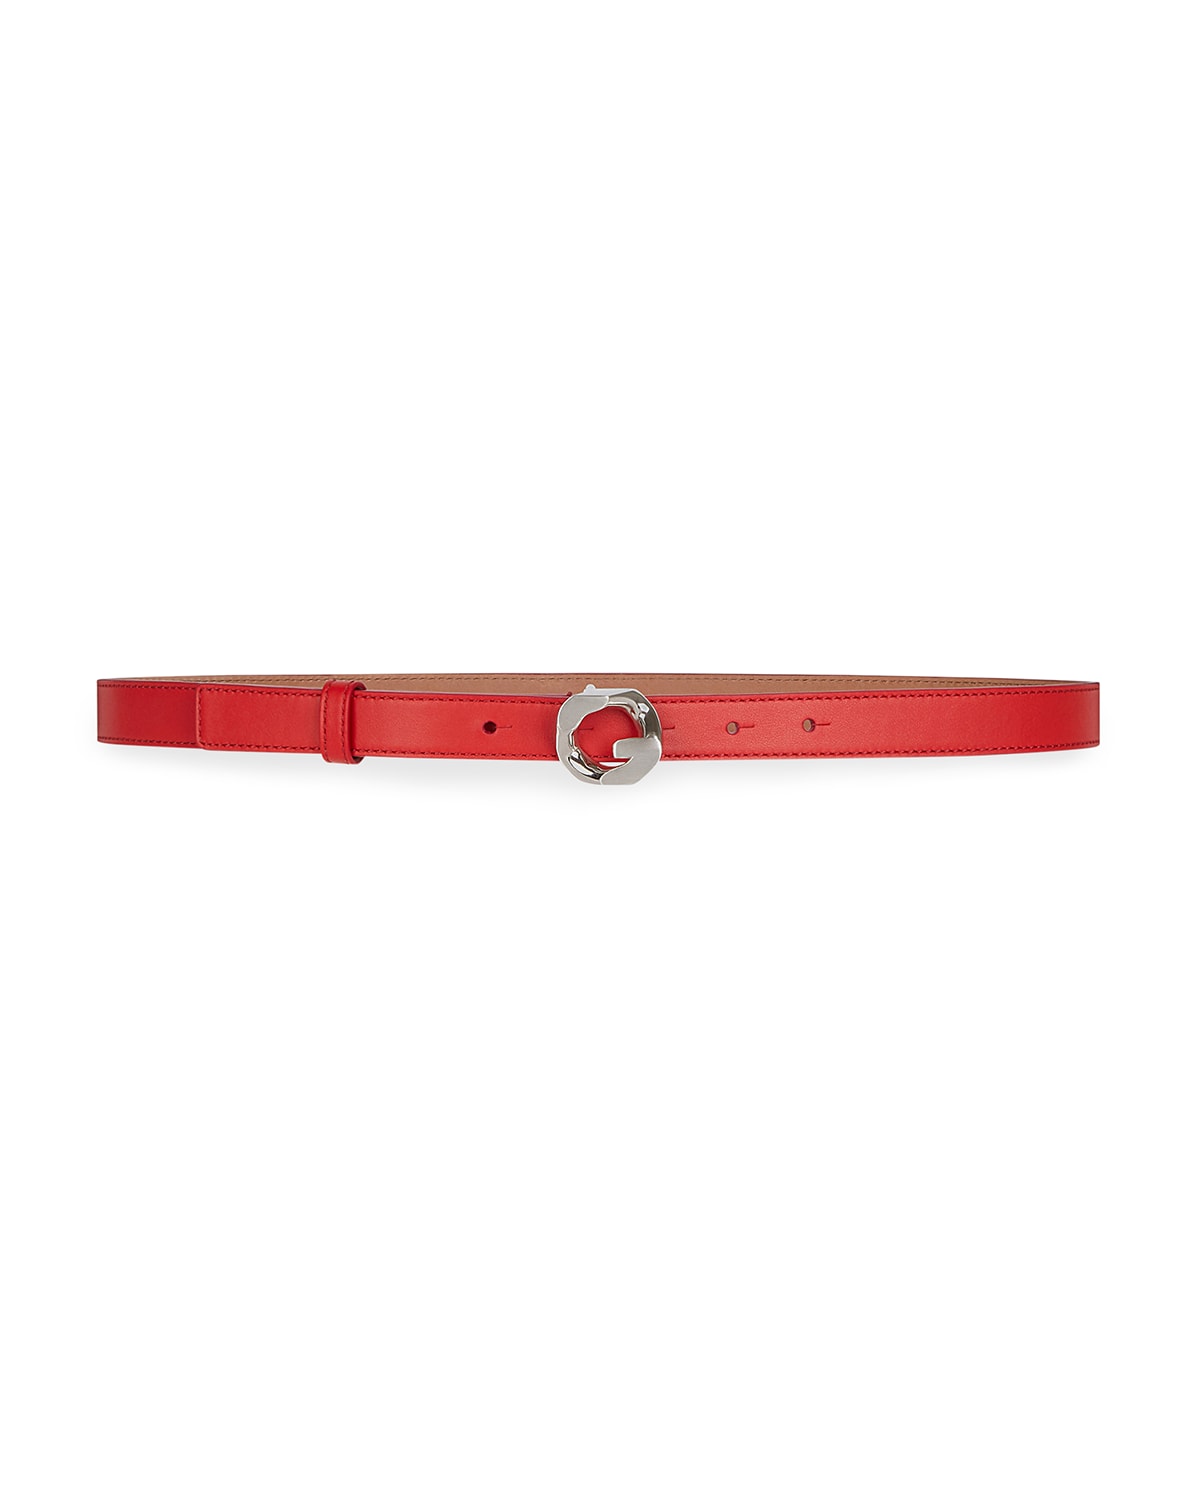 GIVENCHY G CHAIN 20MM LEATHER BELT,PROD239280339